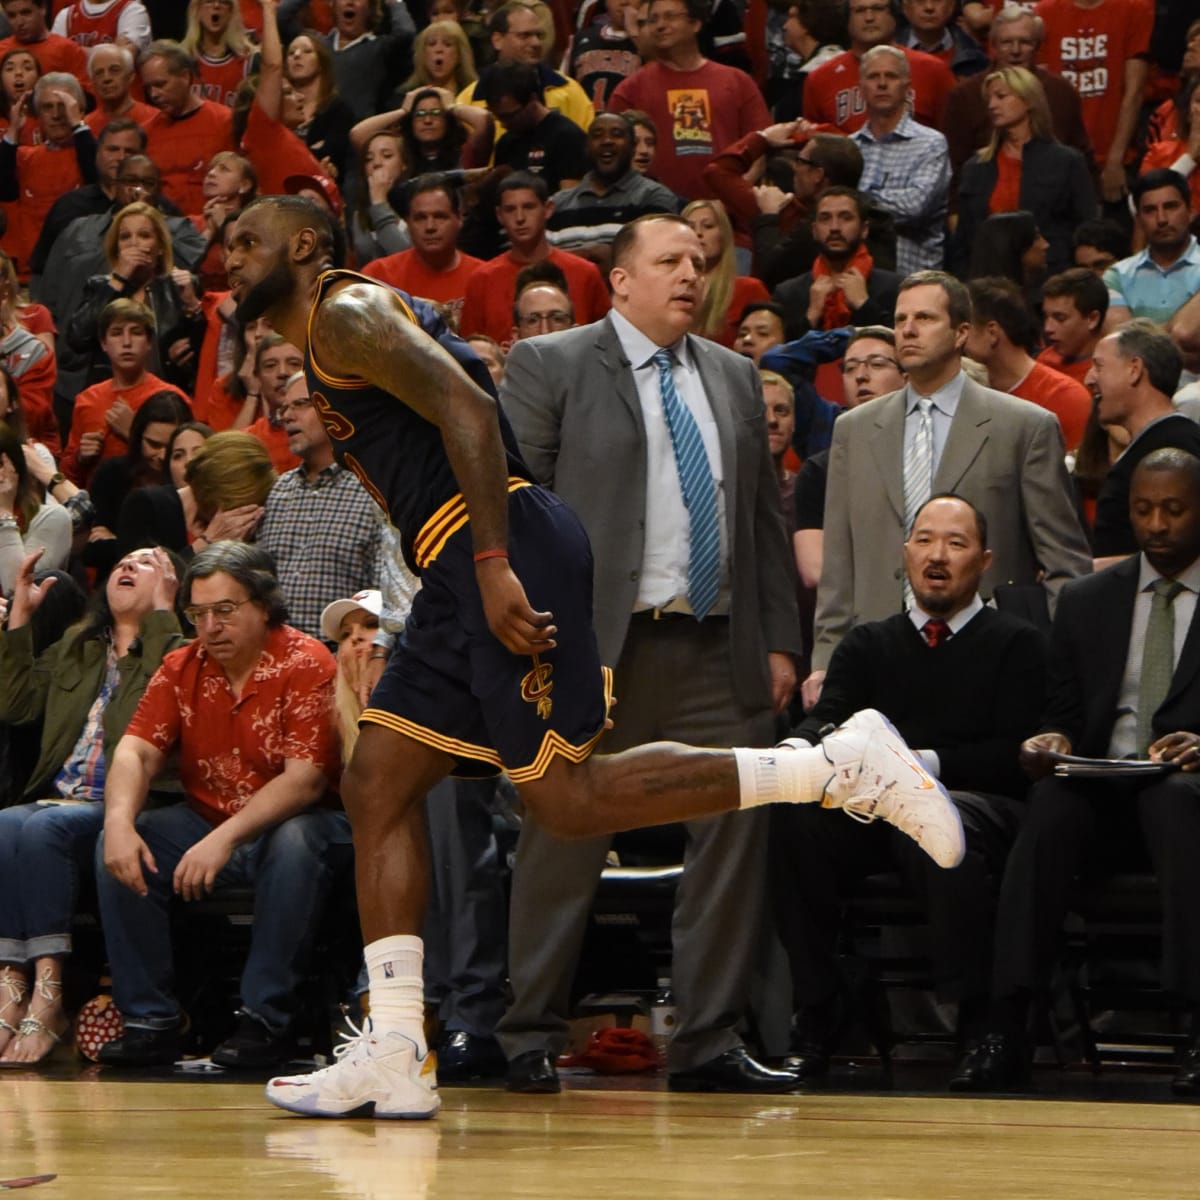 The King of Clutch; LeBron is No. 1 in NBA playoff buzzer beaters